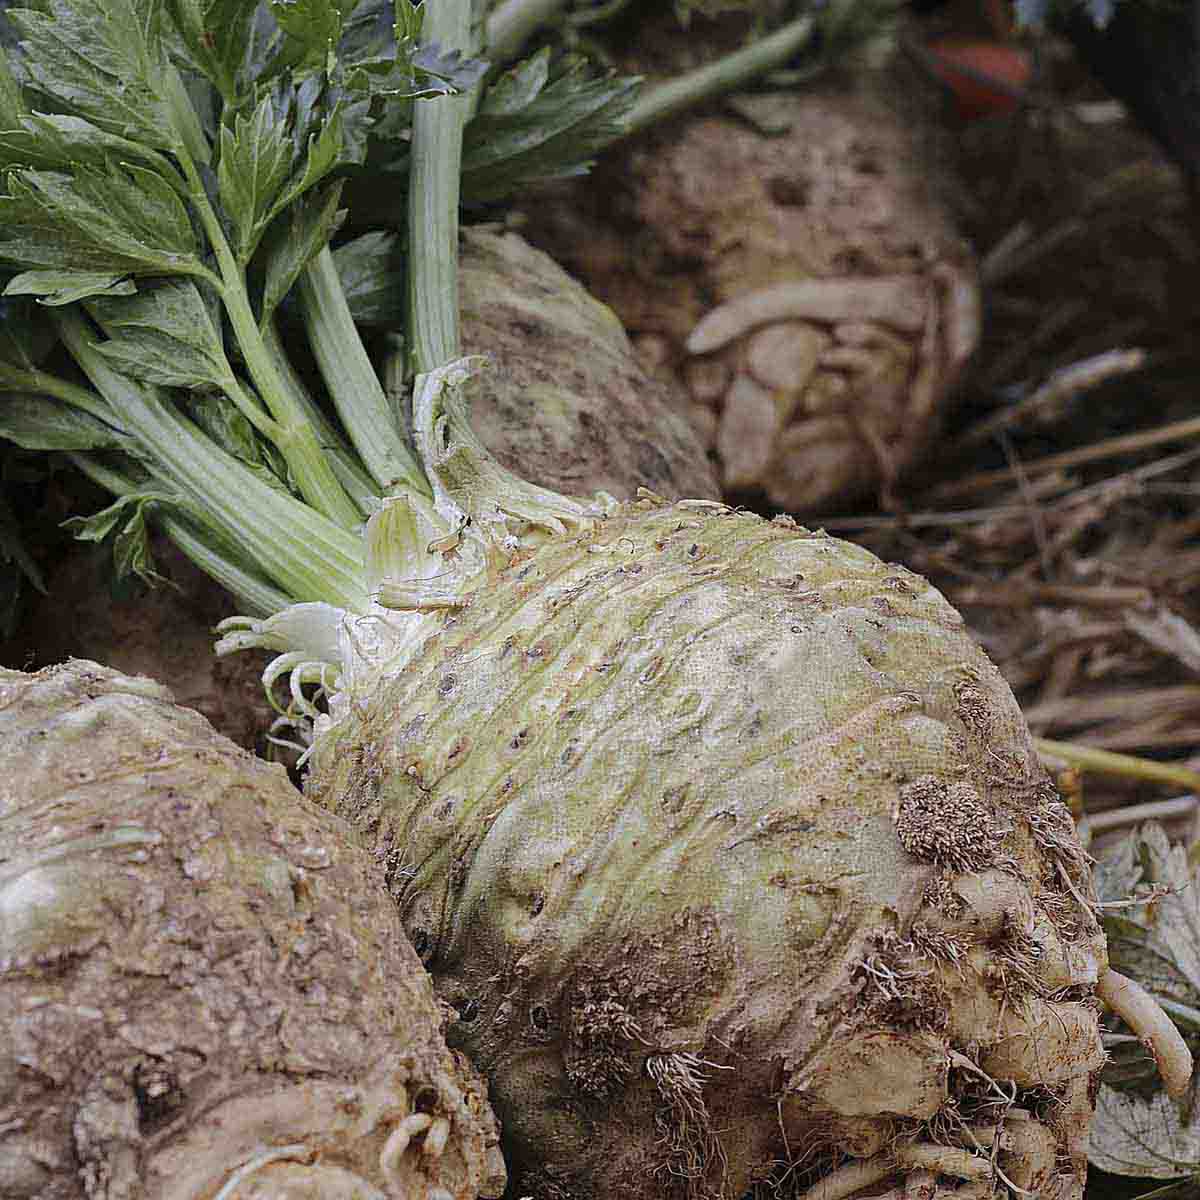 Large celeriac bulbs with celery greens still attached.